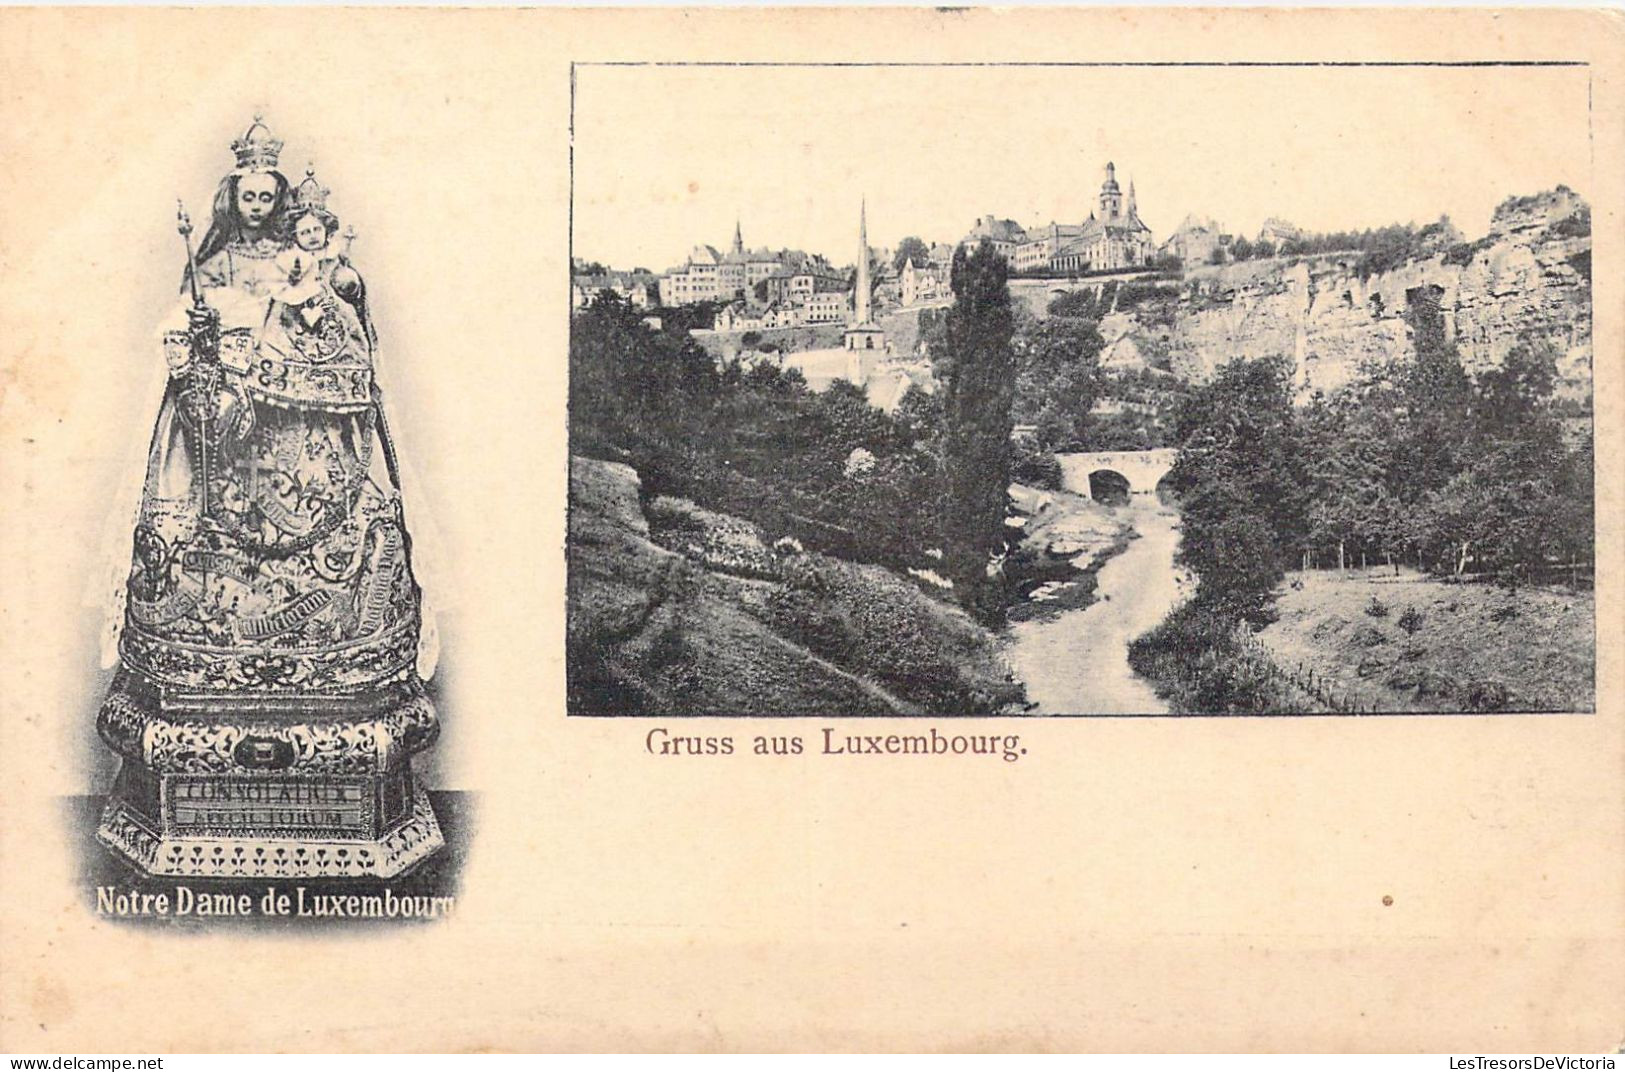 LUXEMBOURG - Gruss Aus Luxembourg - Notre Dame De Luxembourg - Carte Postale Ancienne - Luxemburg - Stad